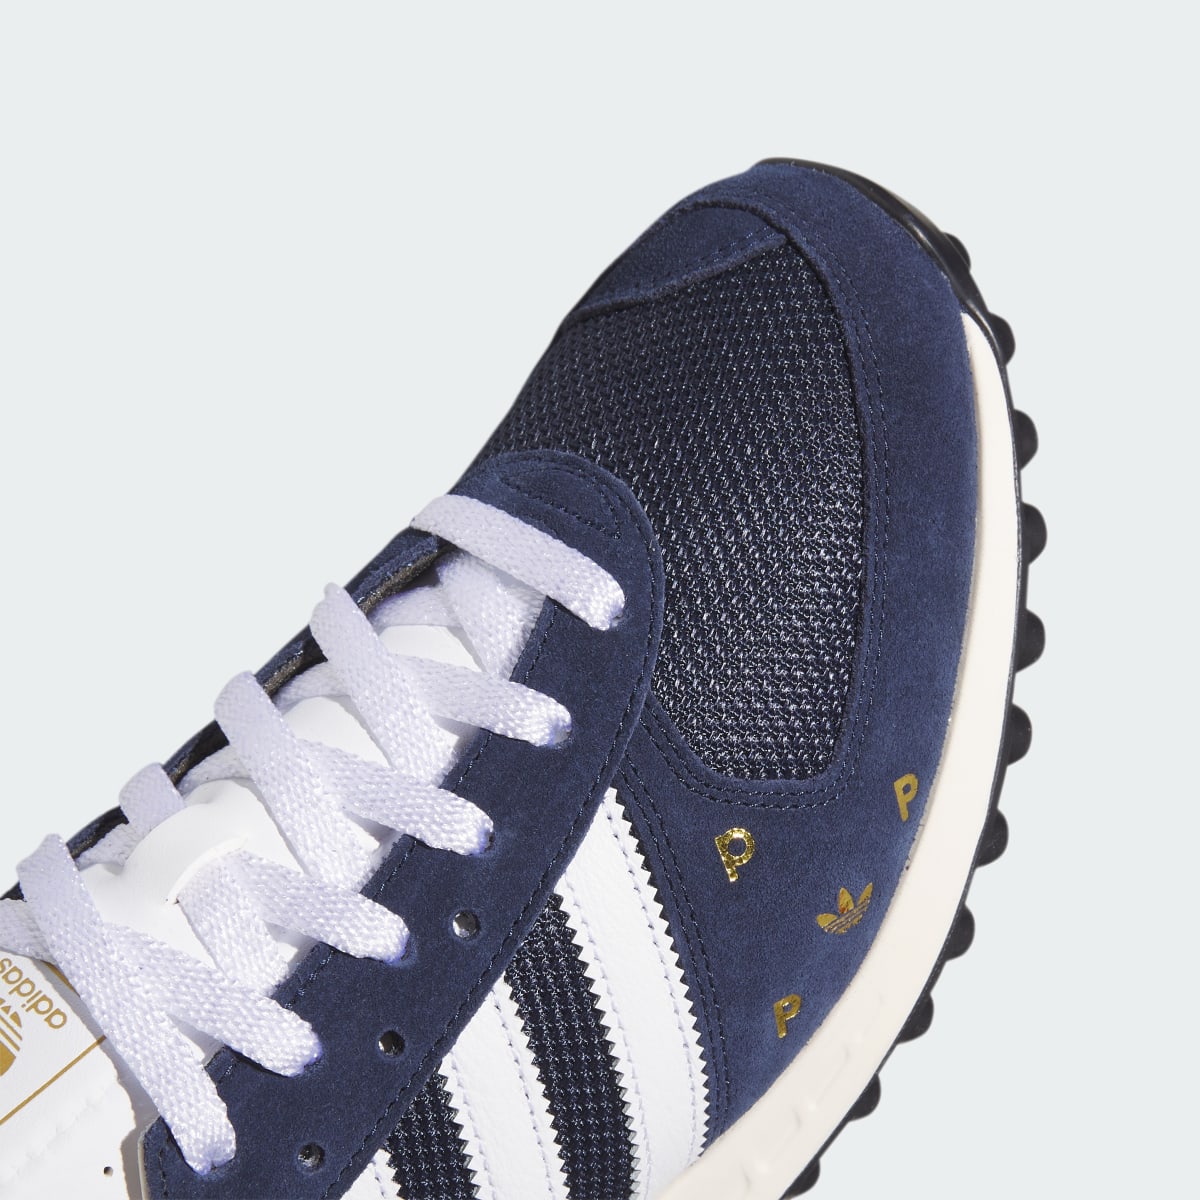 Adidas Pop Trading Co TRX Trainers. 11